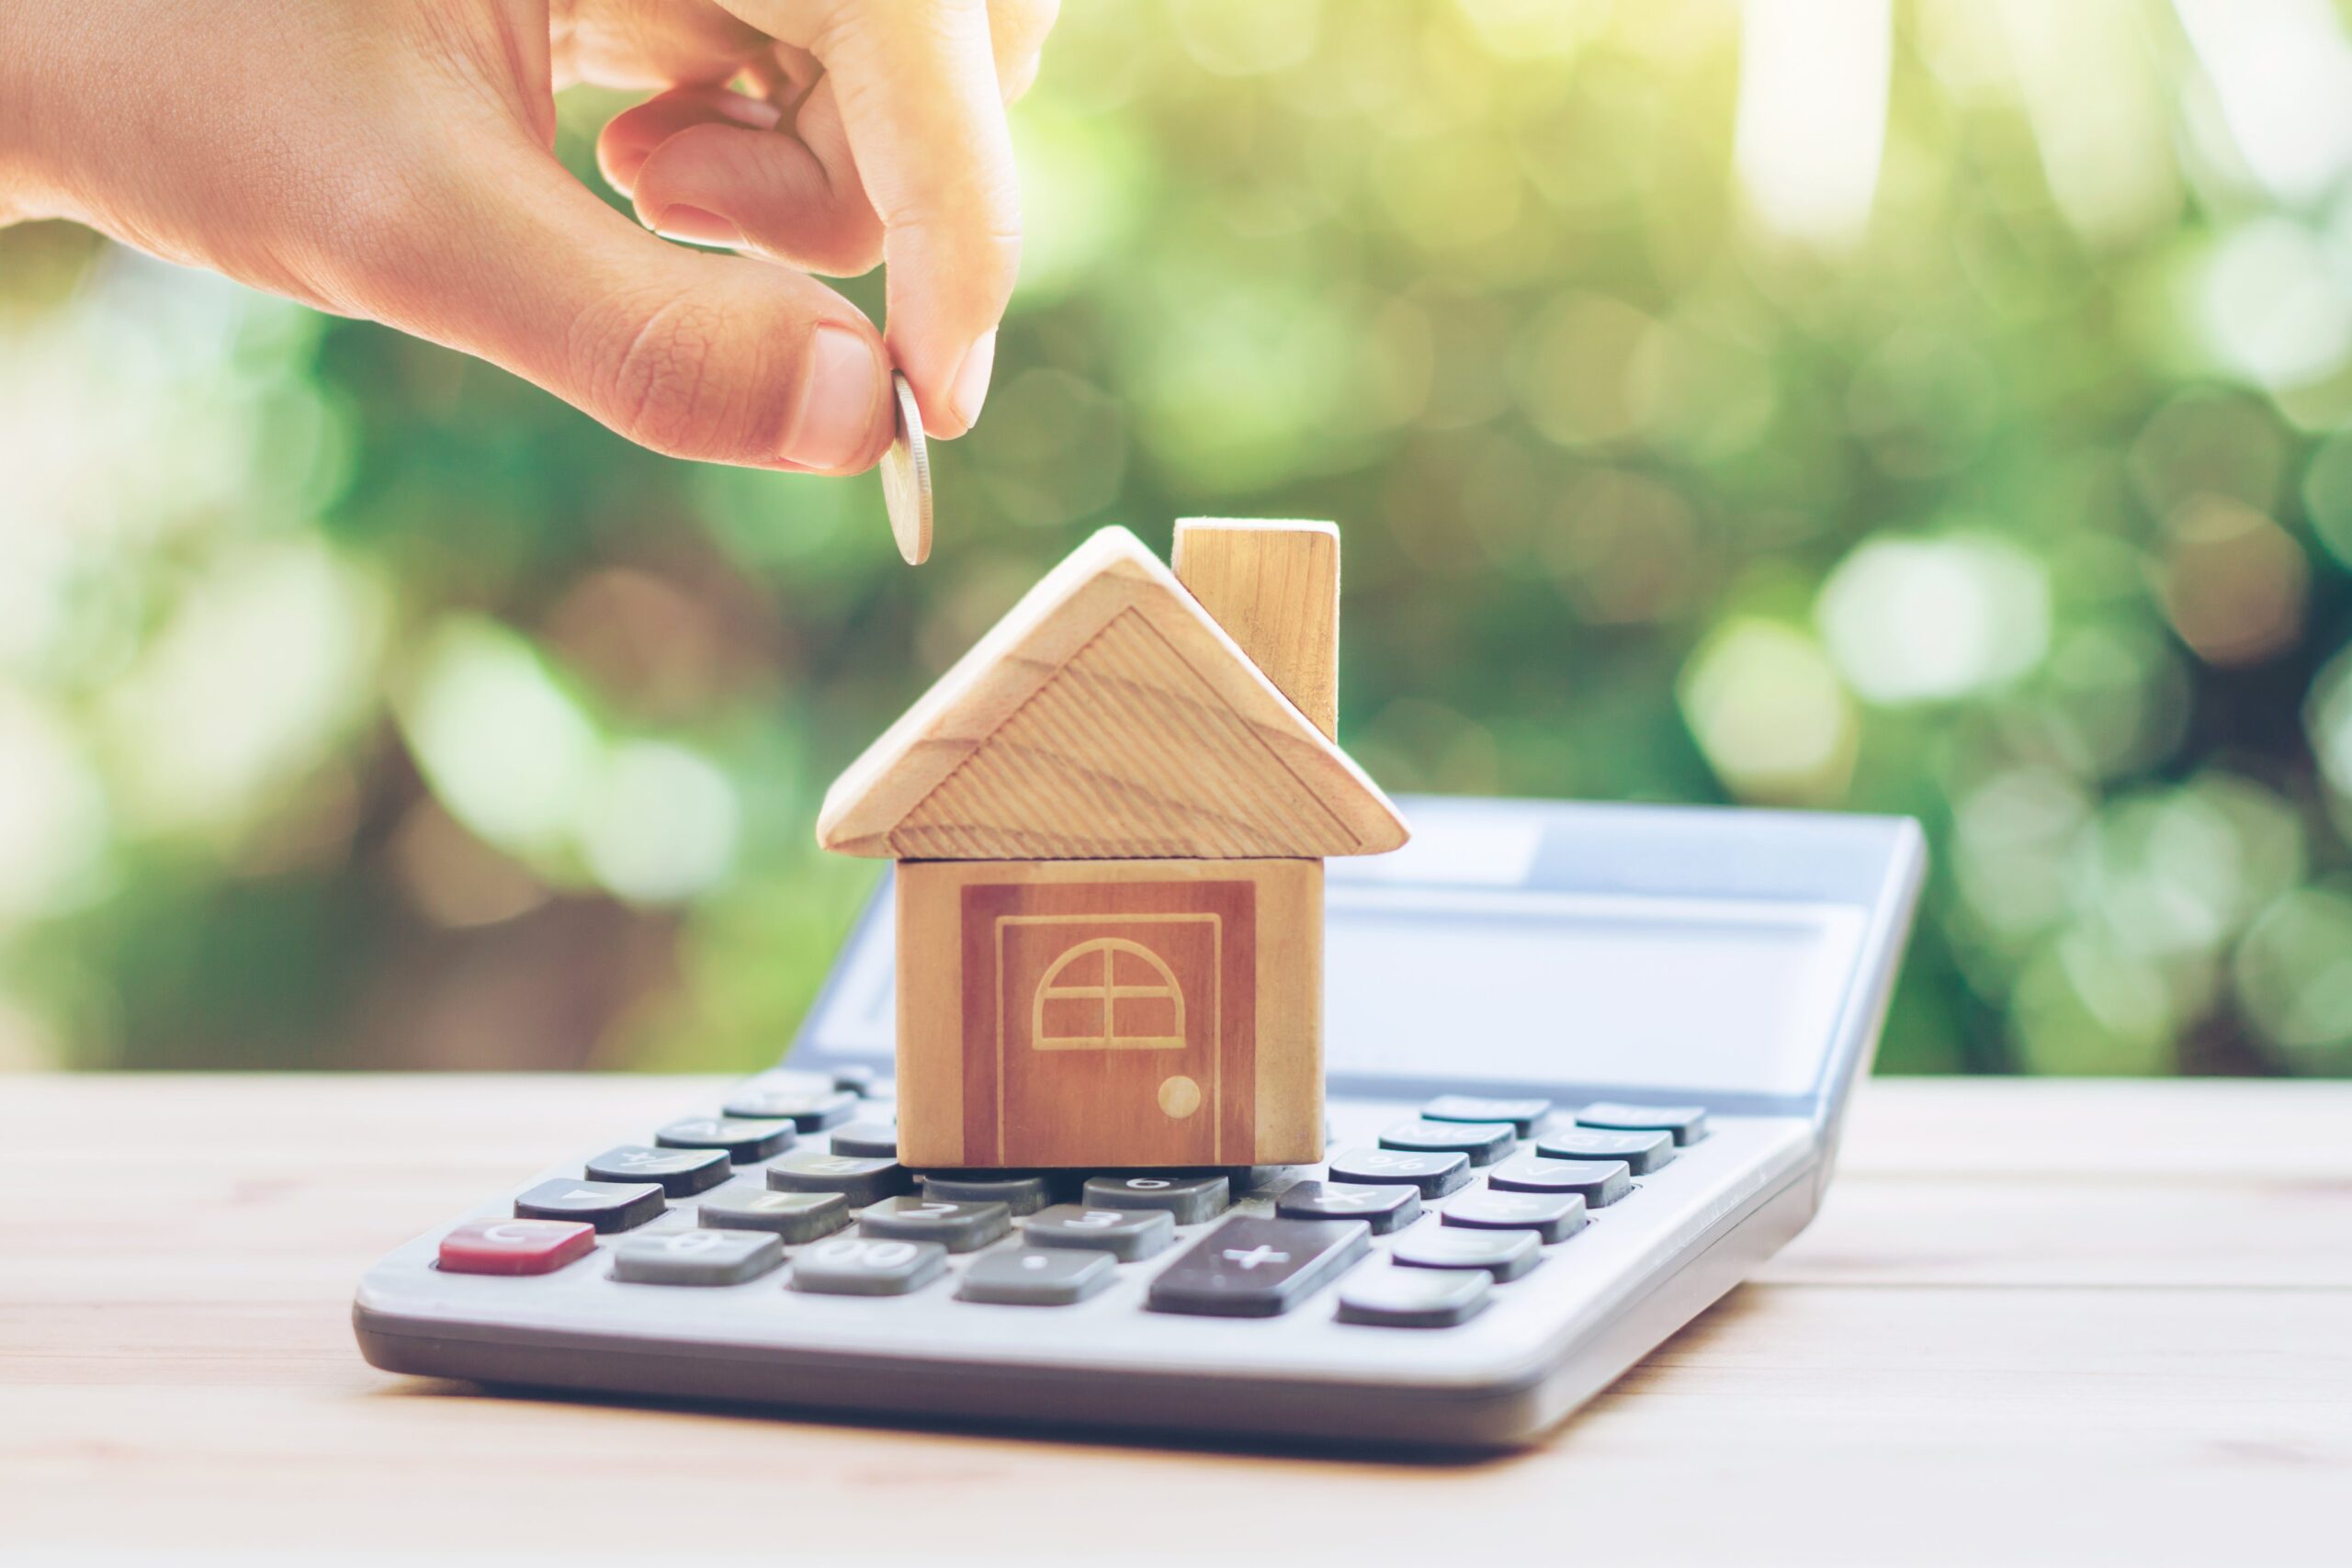 Know Everything About The Interest Rate On Loan Against Property